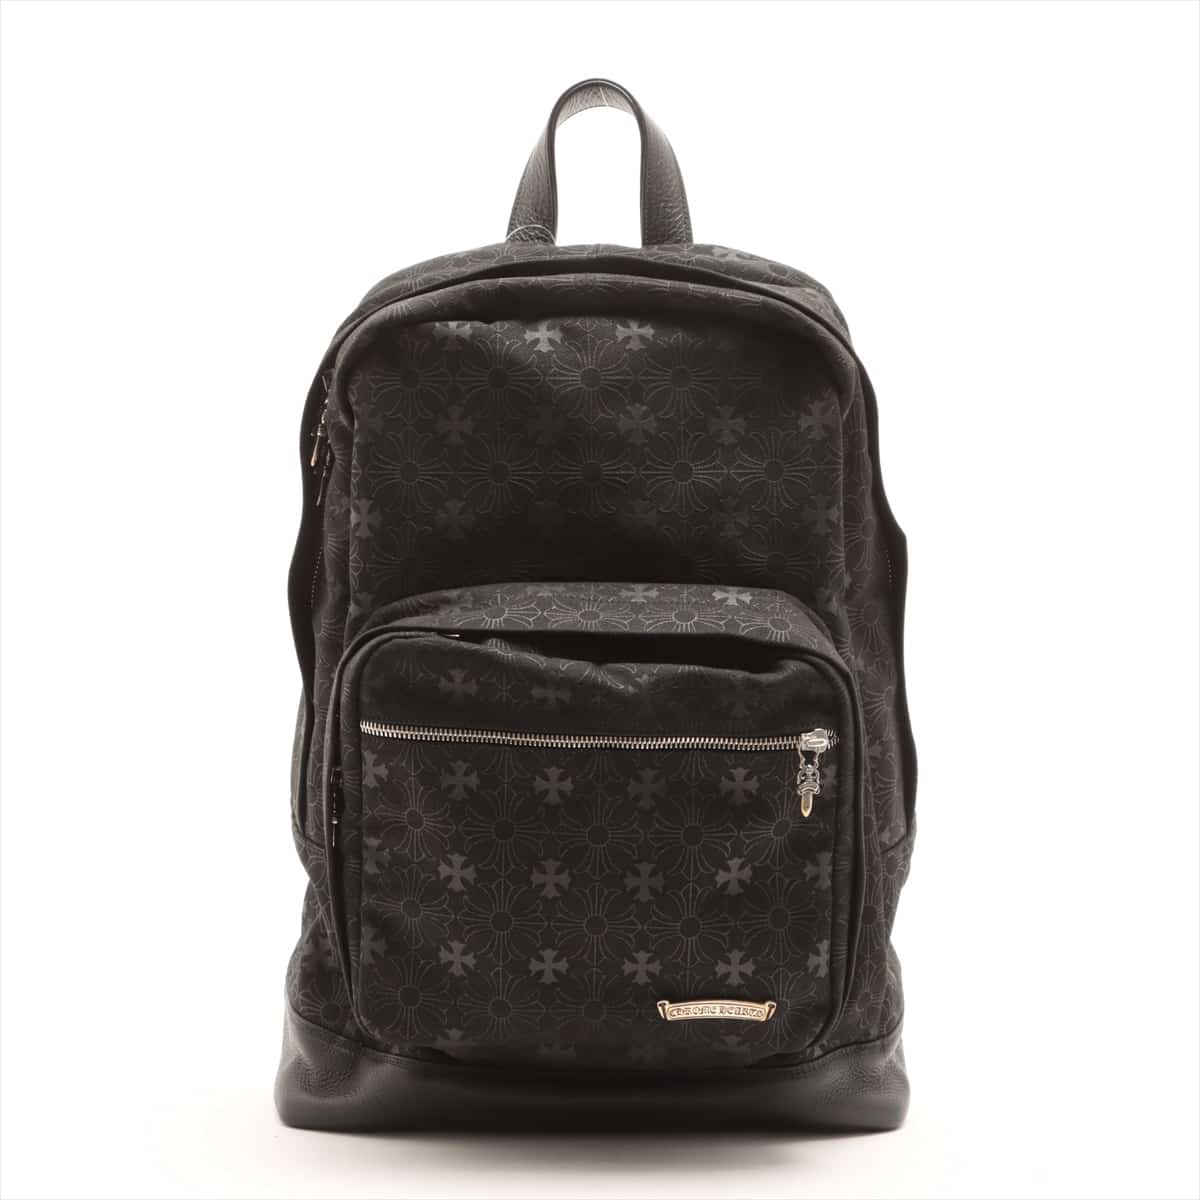 Chrome Hearts 7th grade  Backpack Cotton & leather With invoice